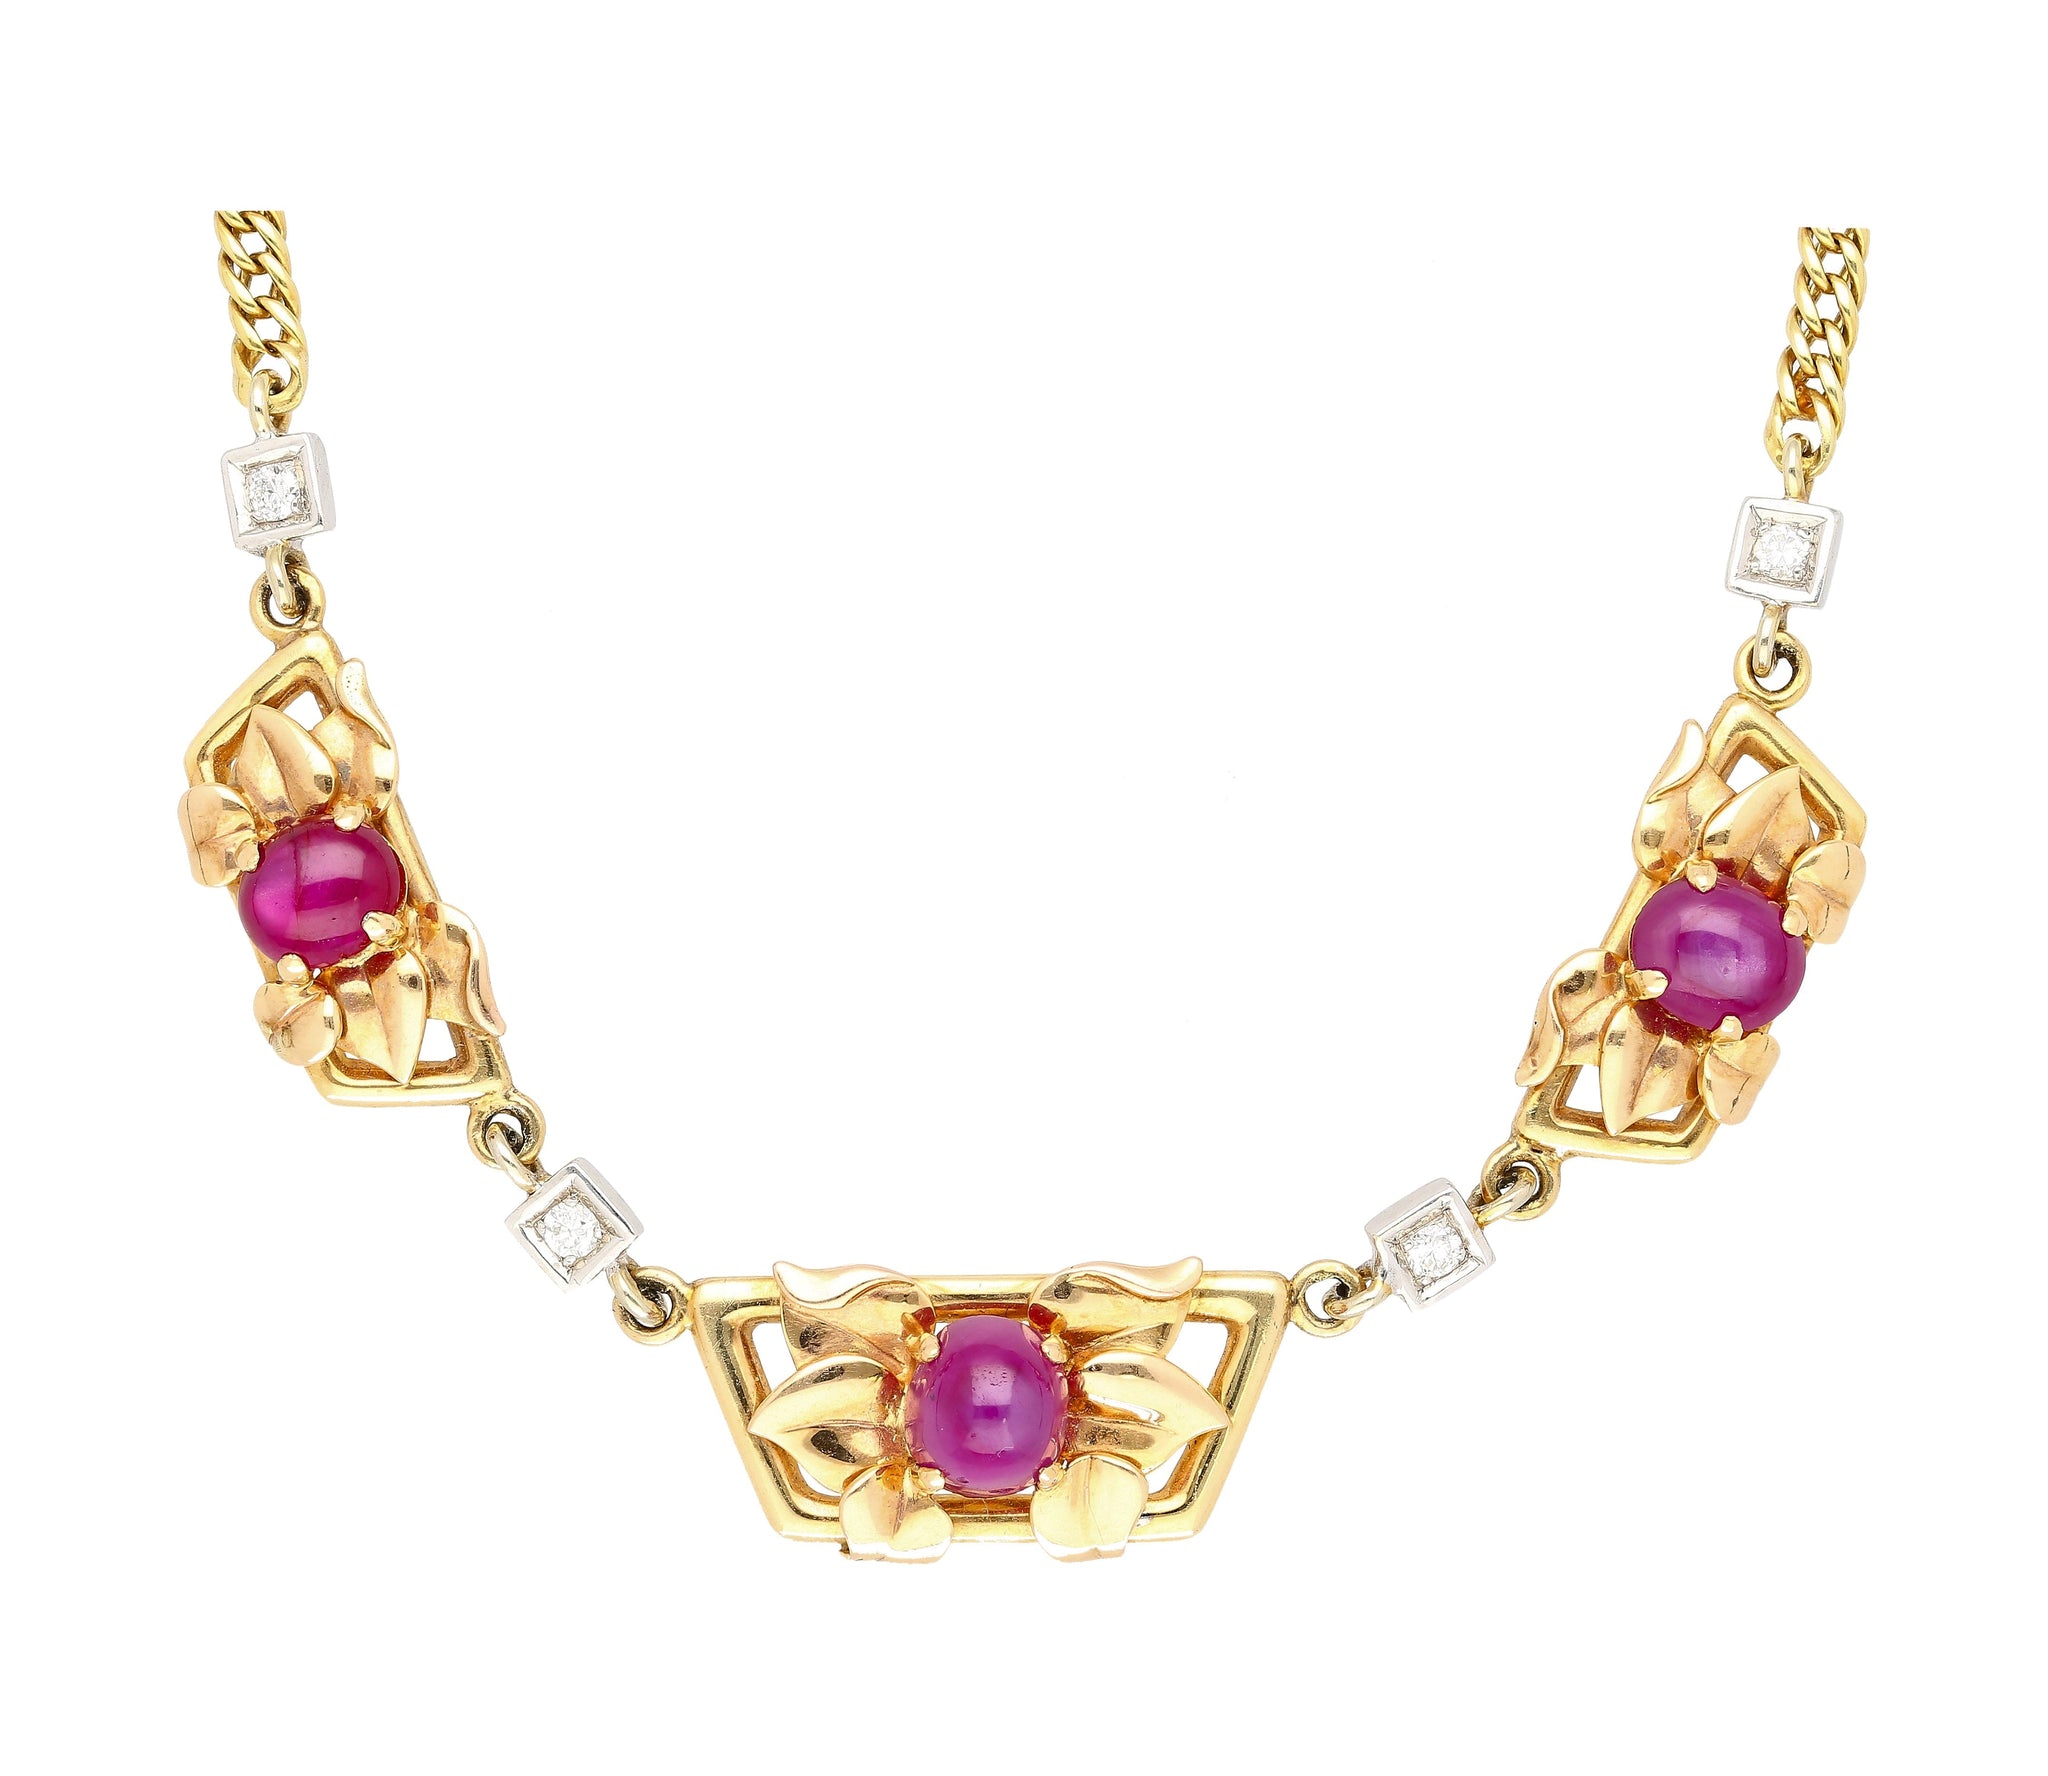 Vintage Retro Era 6.22 Carat Star-Ruby & Diamond Necklace with 14K Gold Carved Detailing